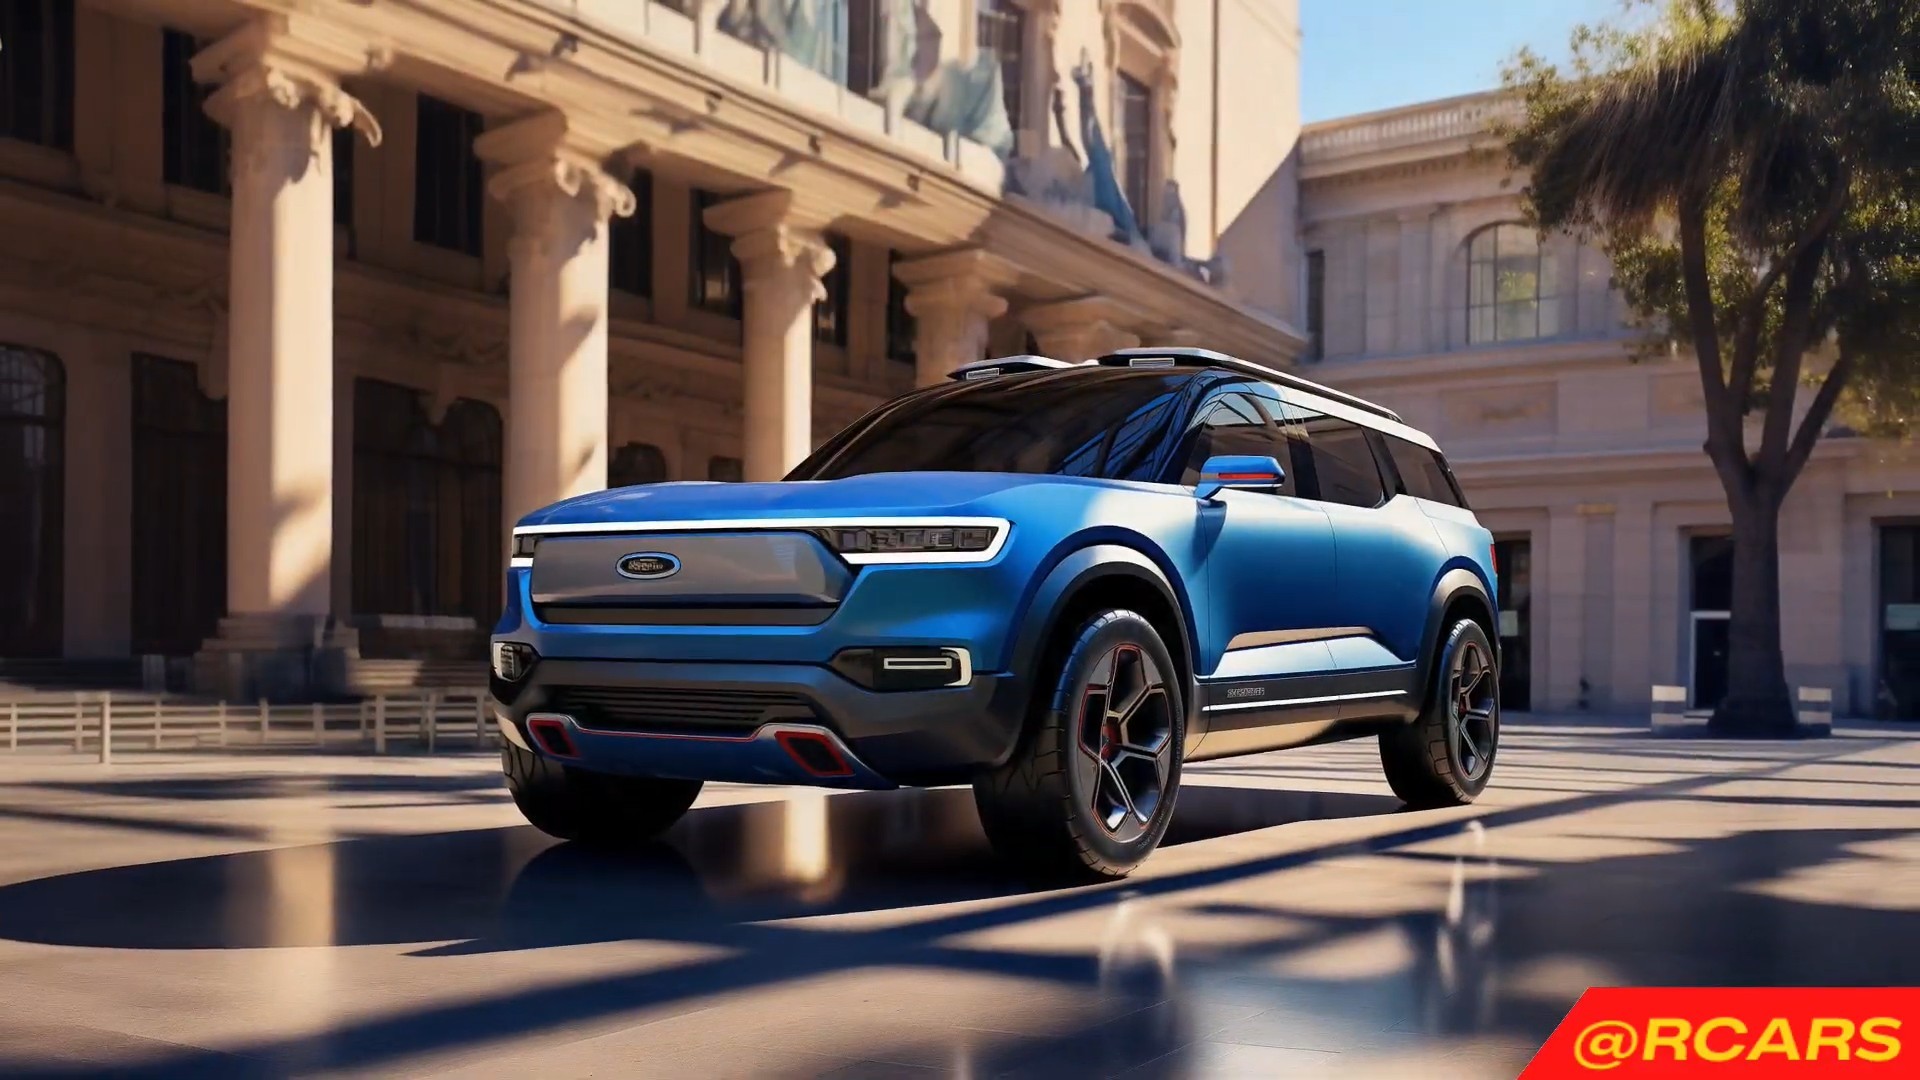 america-s-2025-ford-explorer-jumps-from-behind-the-cgi-curtain-with-ev-options-11.jpg